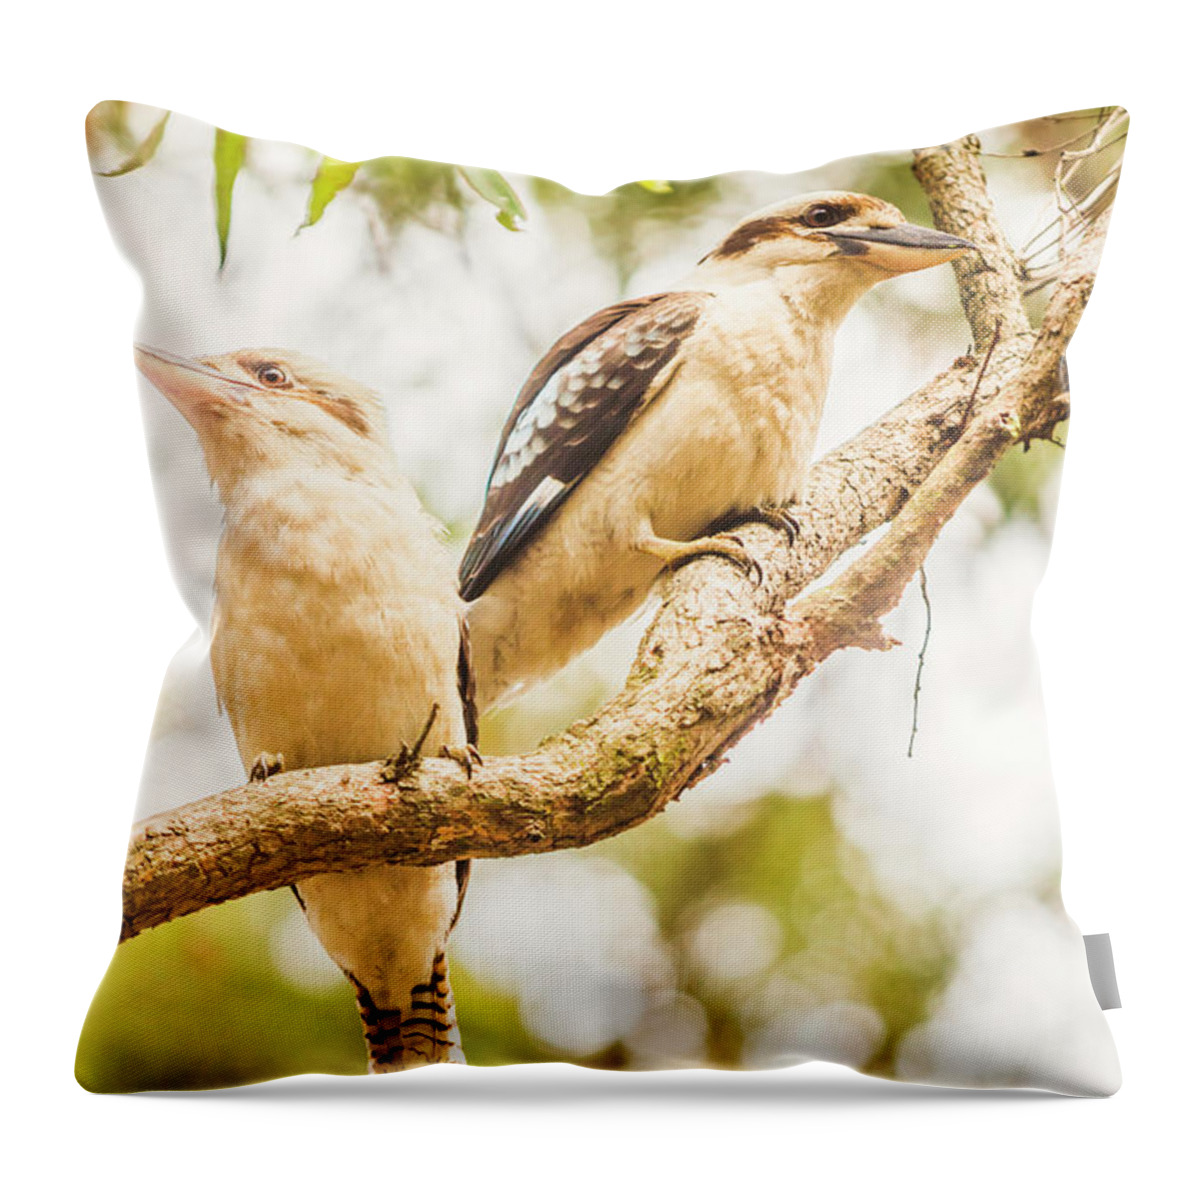 Australia Throw Pillow featuring the photograph Branched Outback by Jorgo Photography